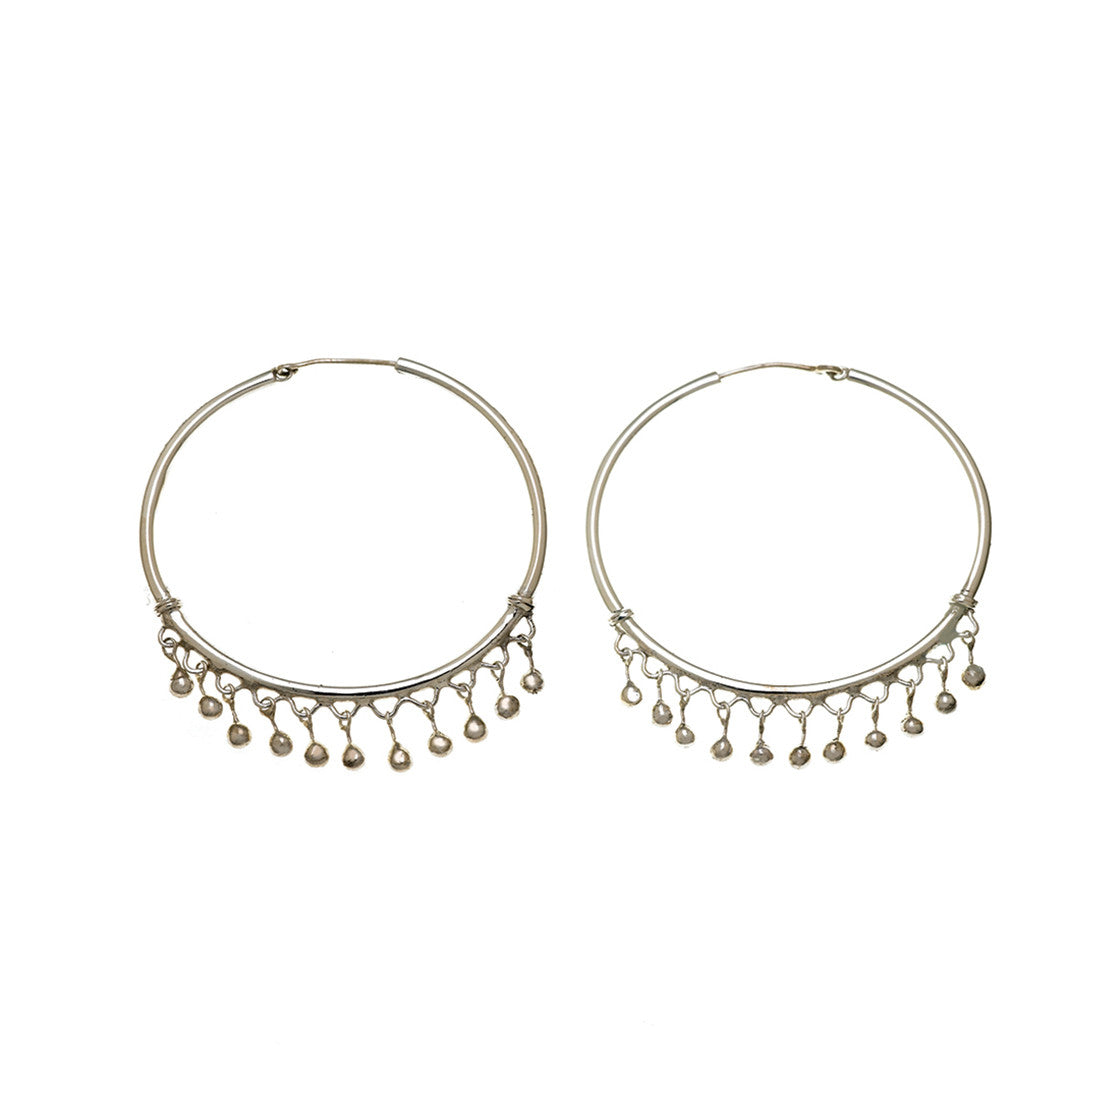 Chand Bali Large Sterling Silver Hoop Earring - Cynthia Gale New York Jewelry